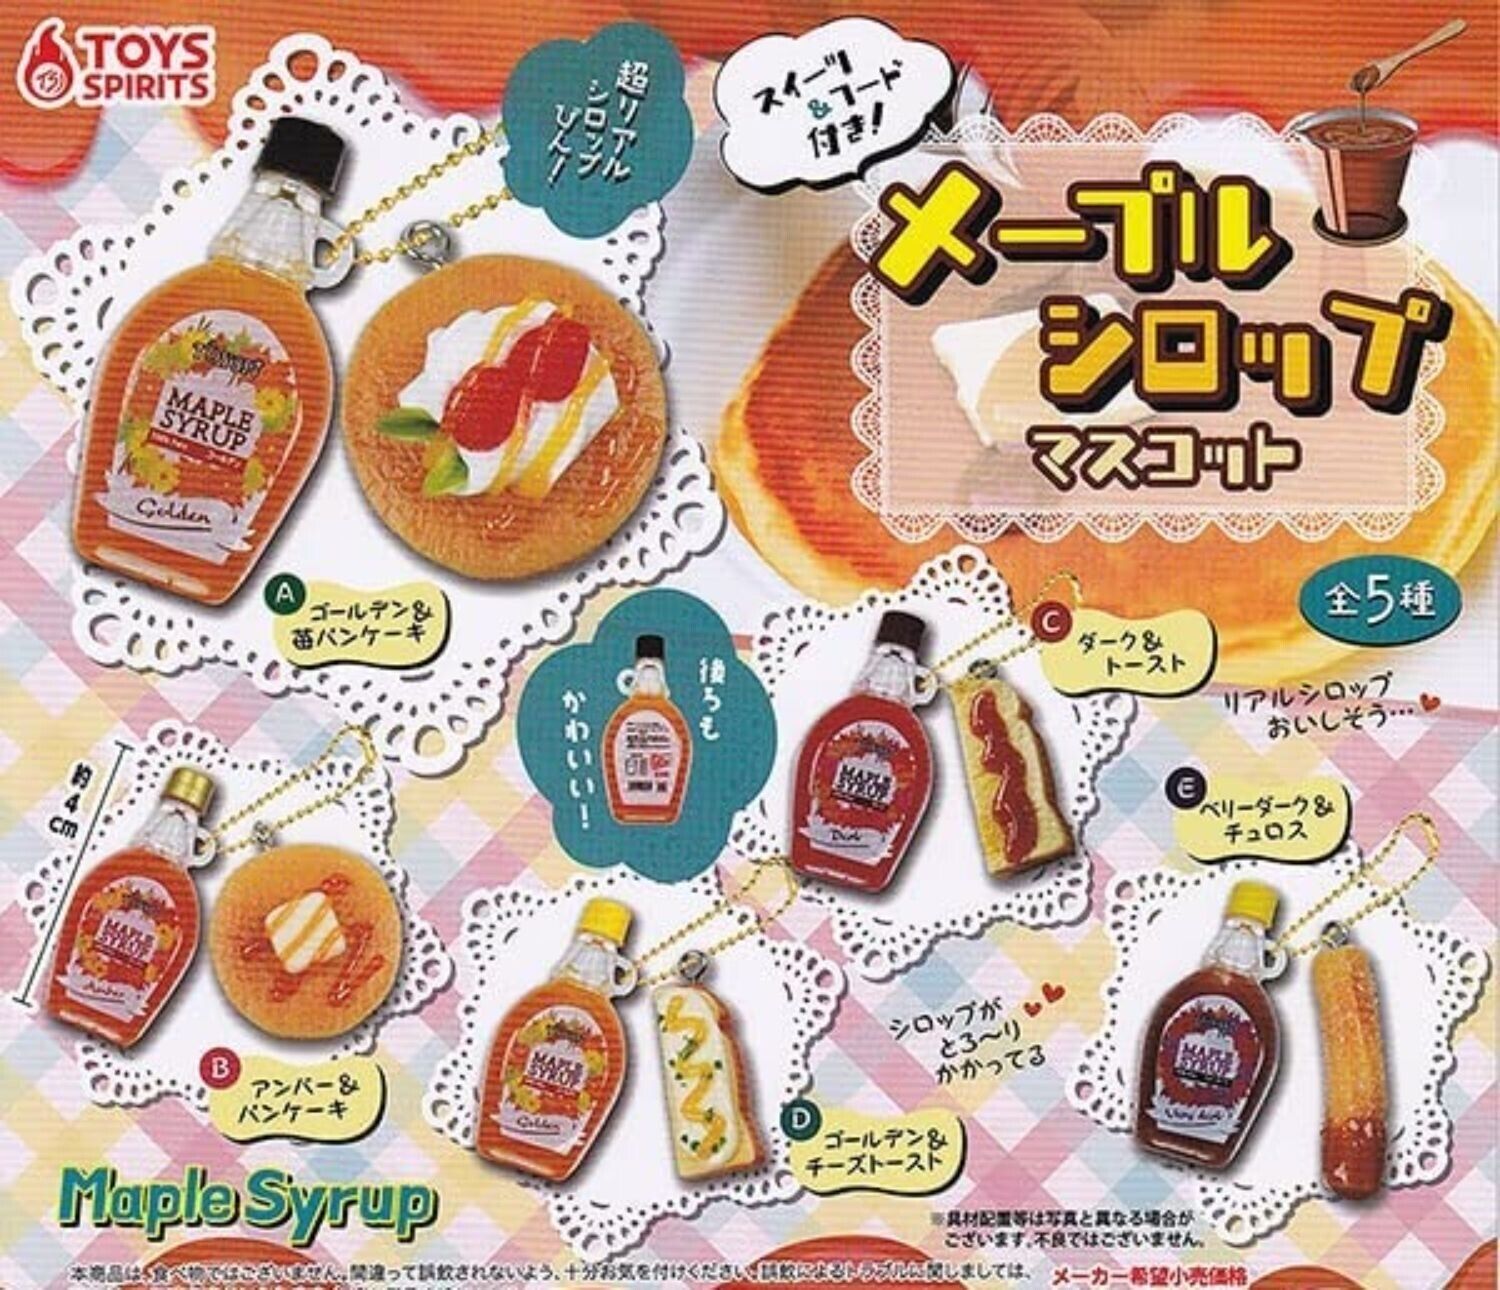 Sweets & food maple syrup Mascot Capsule Toy 5 Types Full Comp Set Gacha New